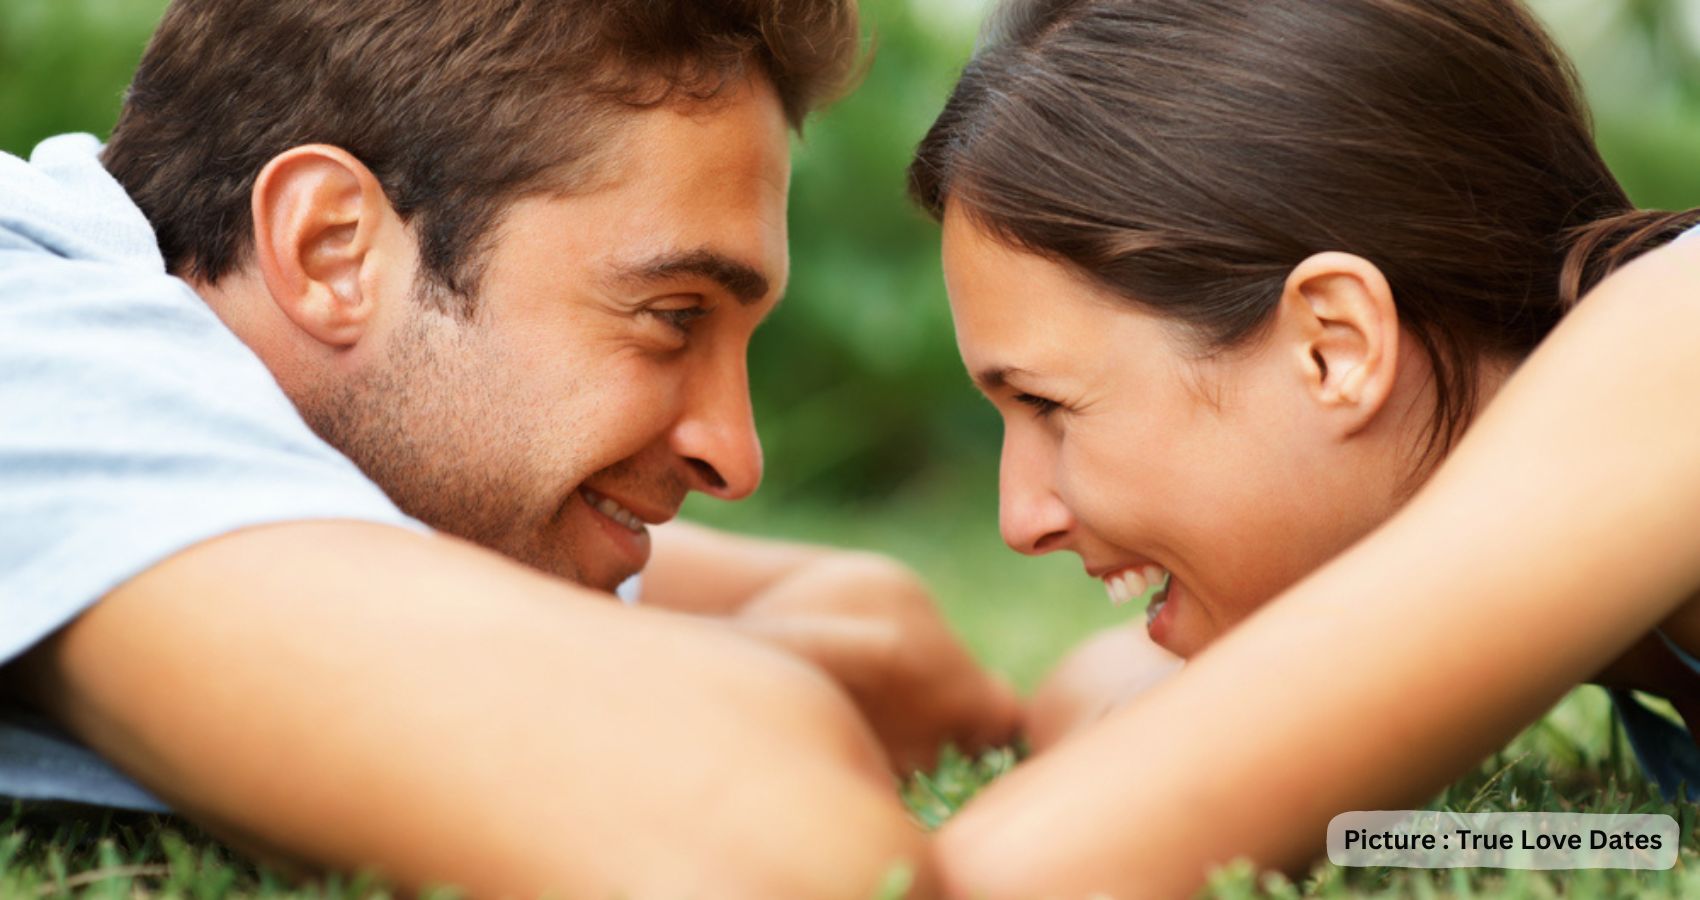 Relationship Experts Share The Non-Physical Traits Men Consider Ideal In A Partner